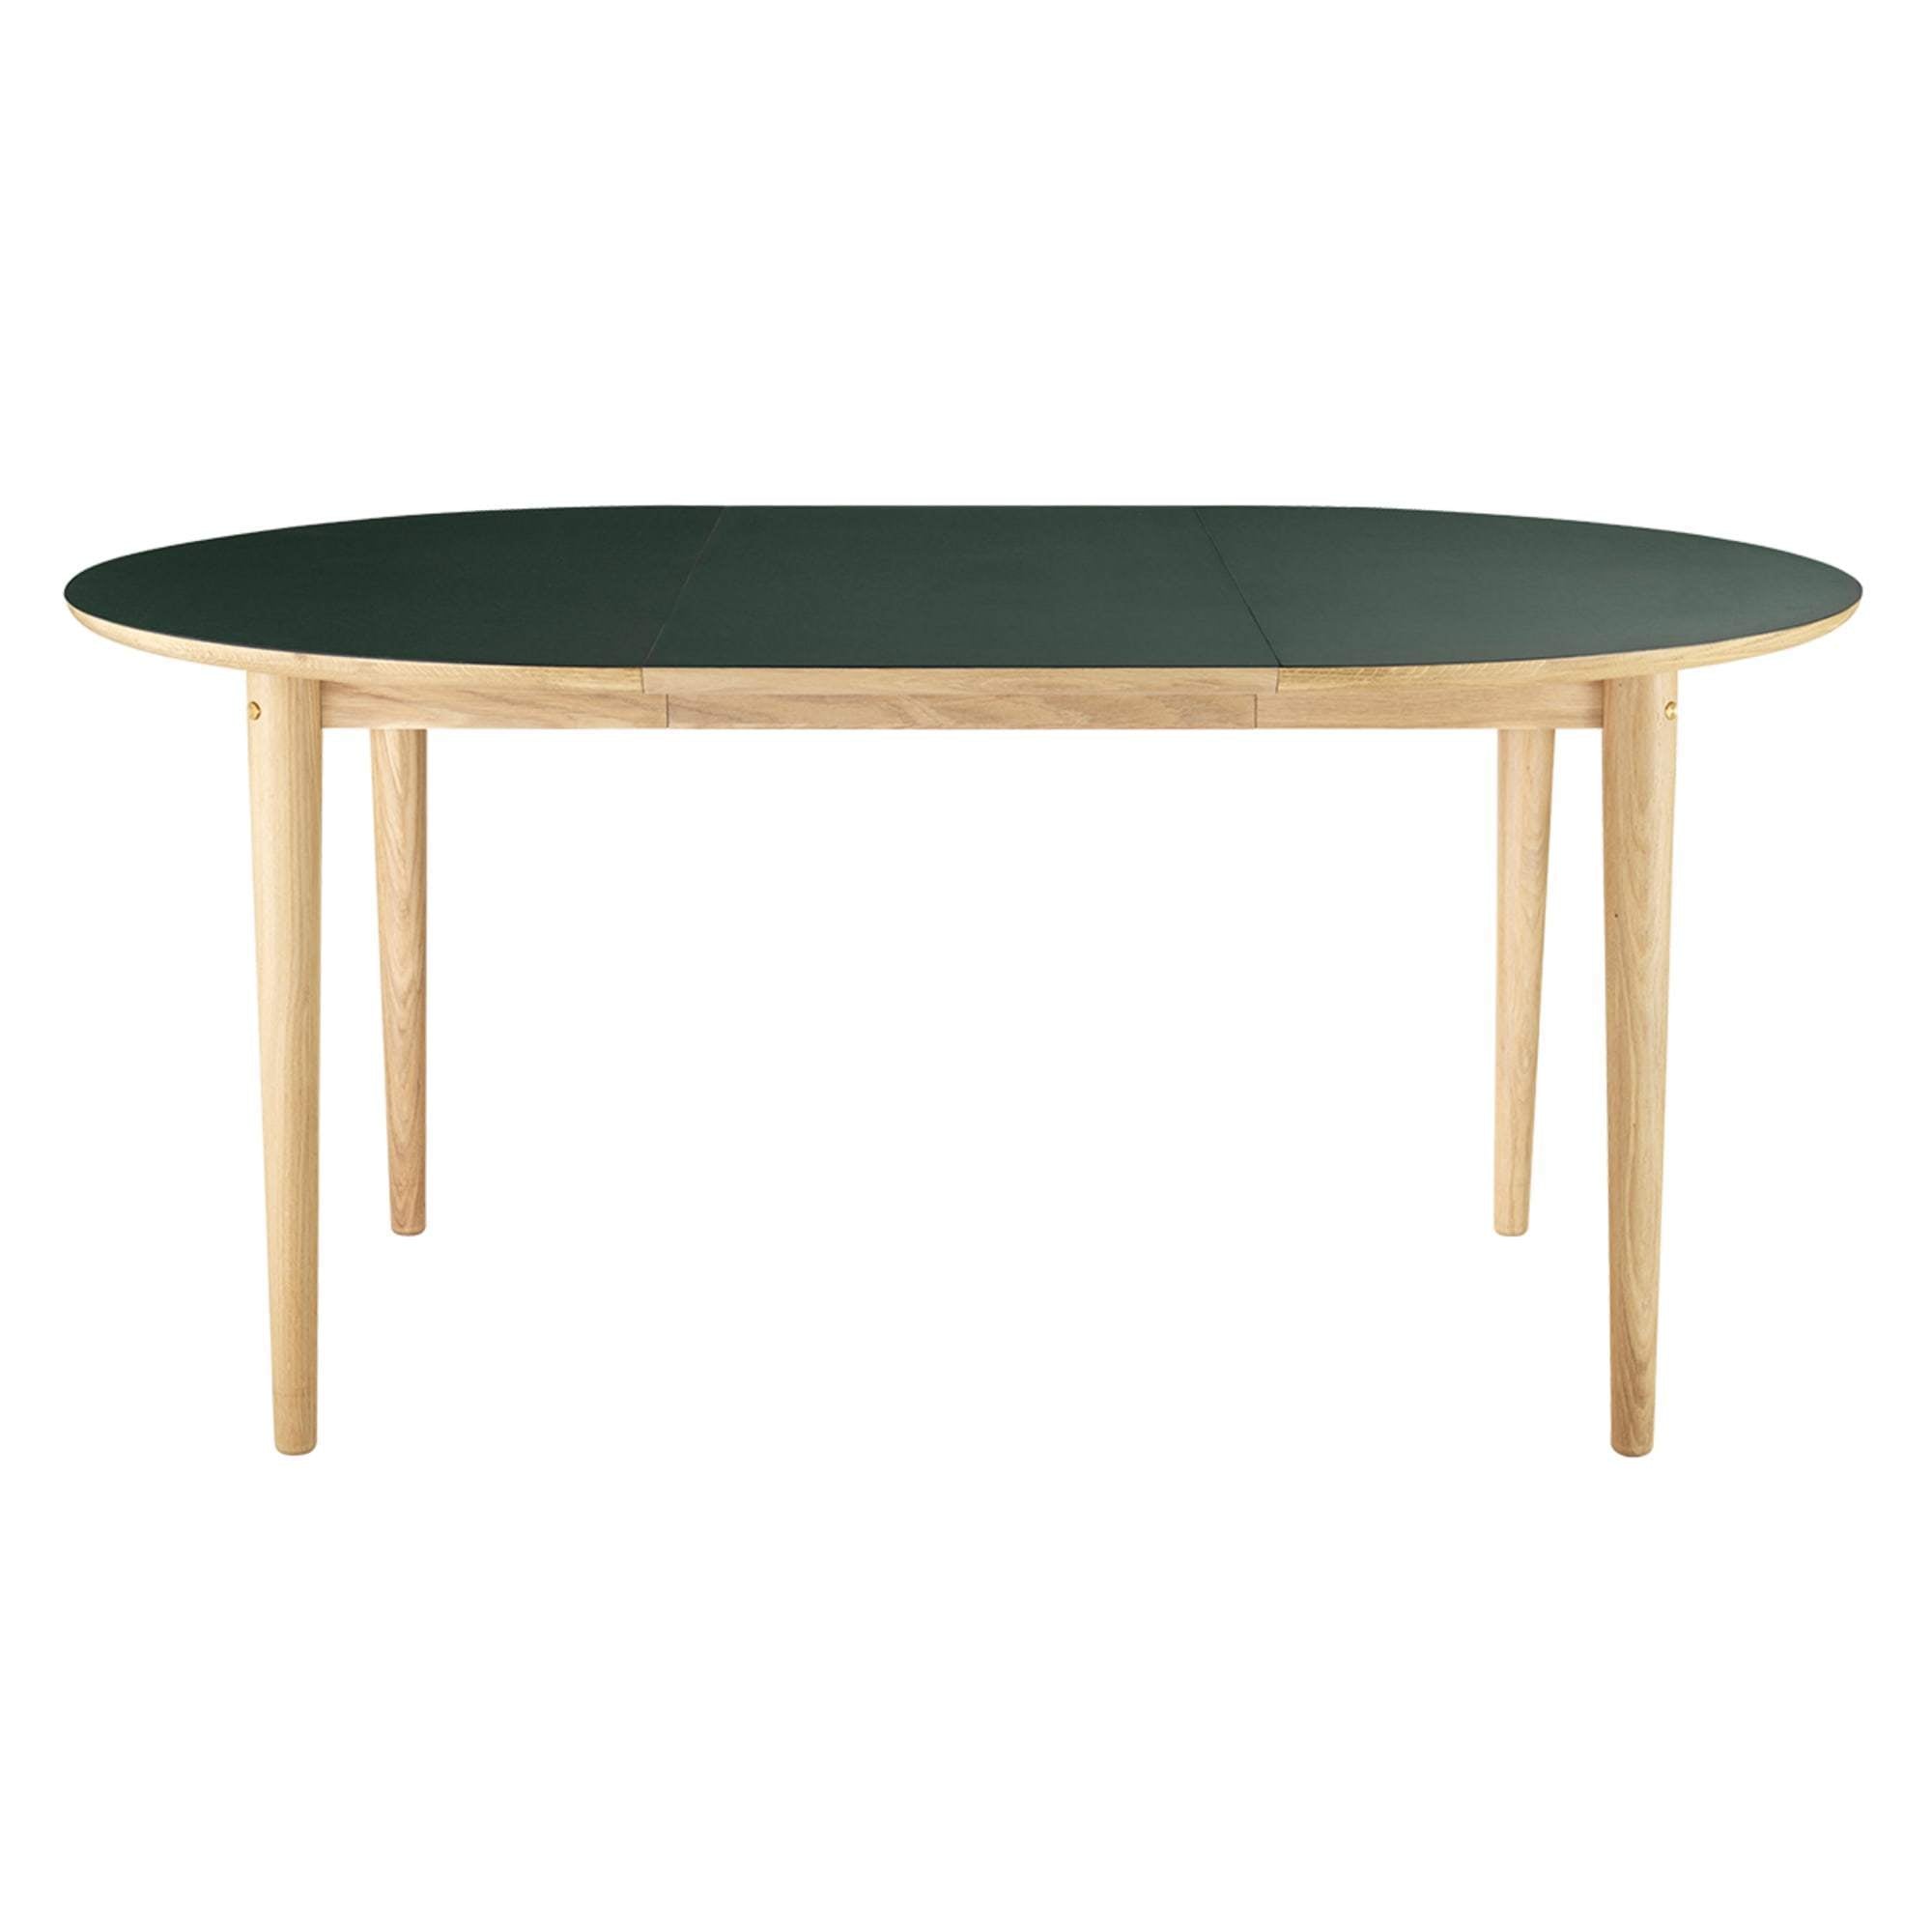 Fdb Møbler C62 E Dining Table With Pull Out Function, Natural/Dark Green Linoleum